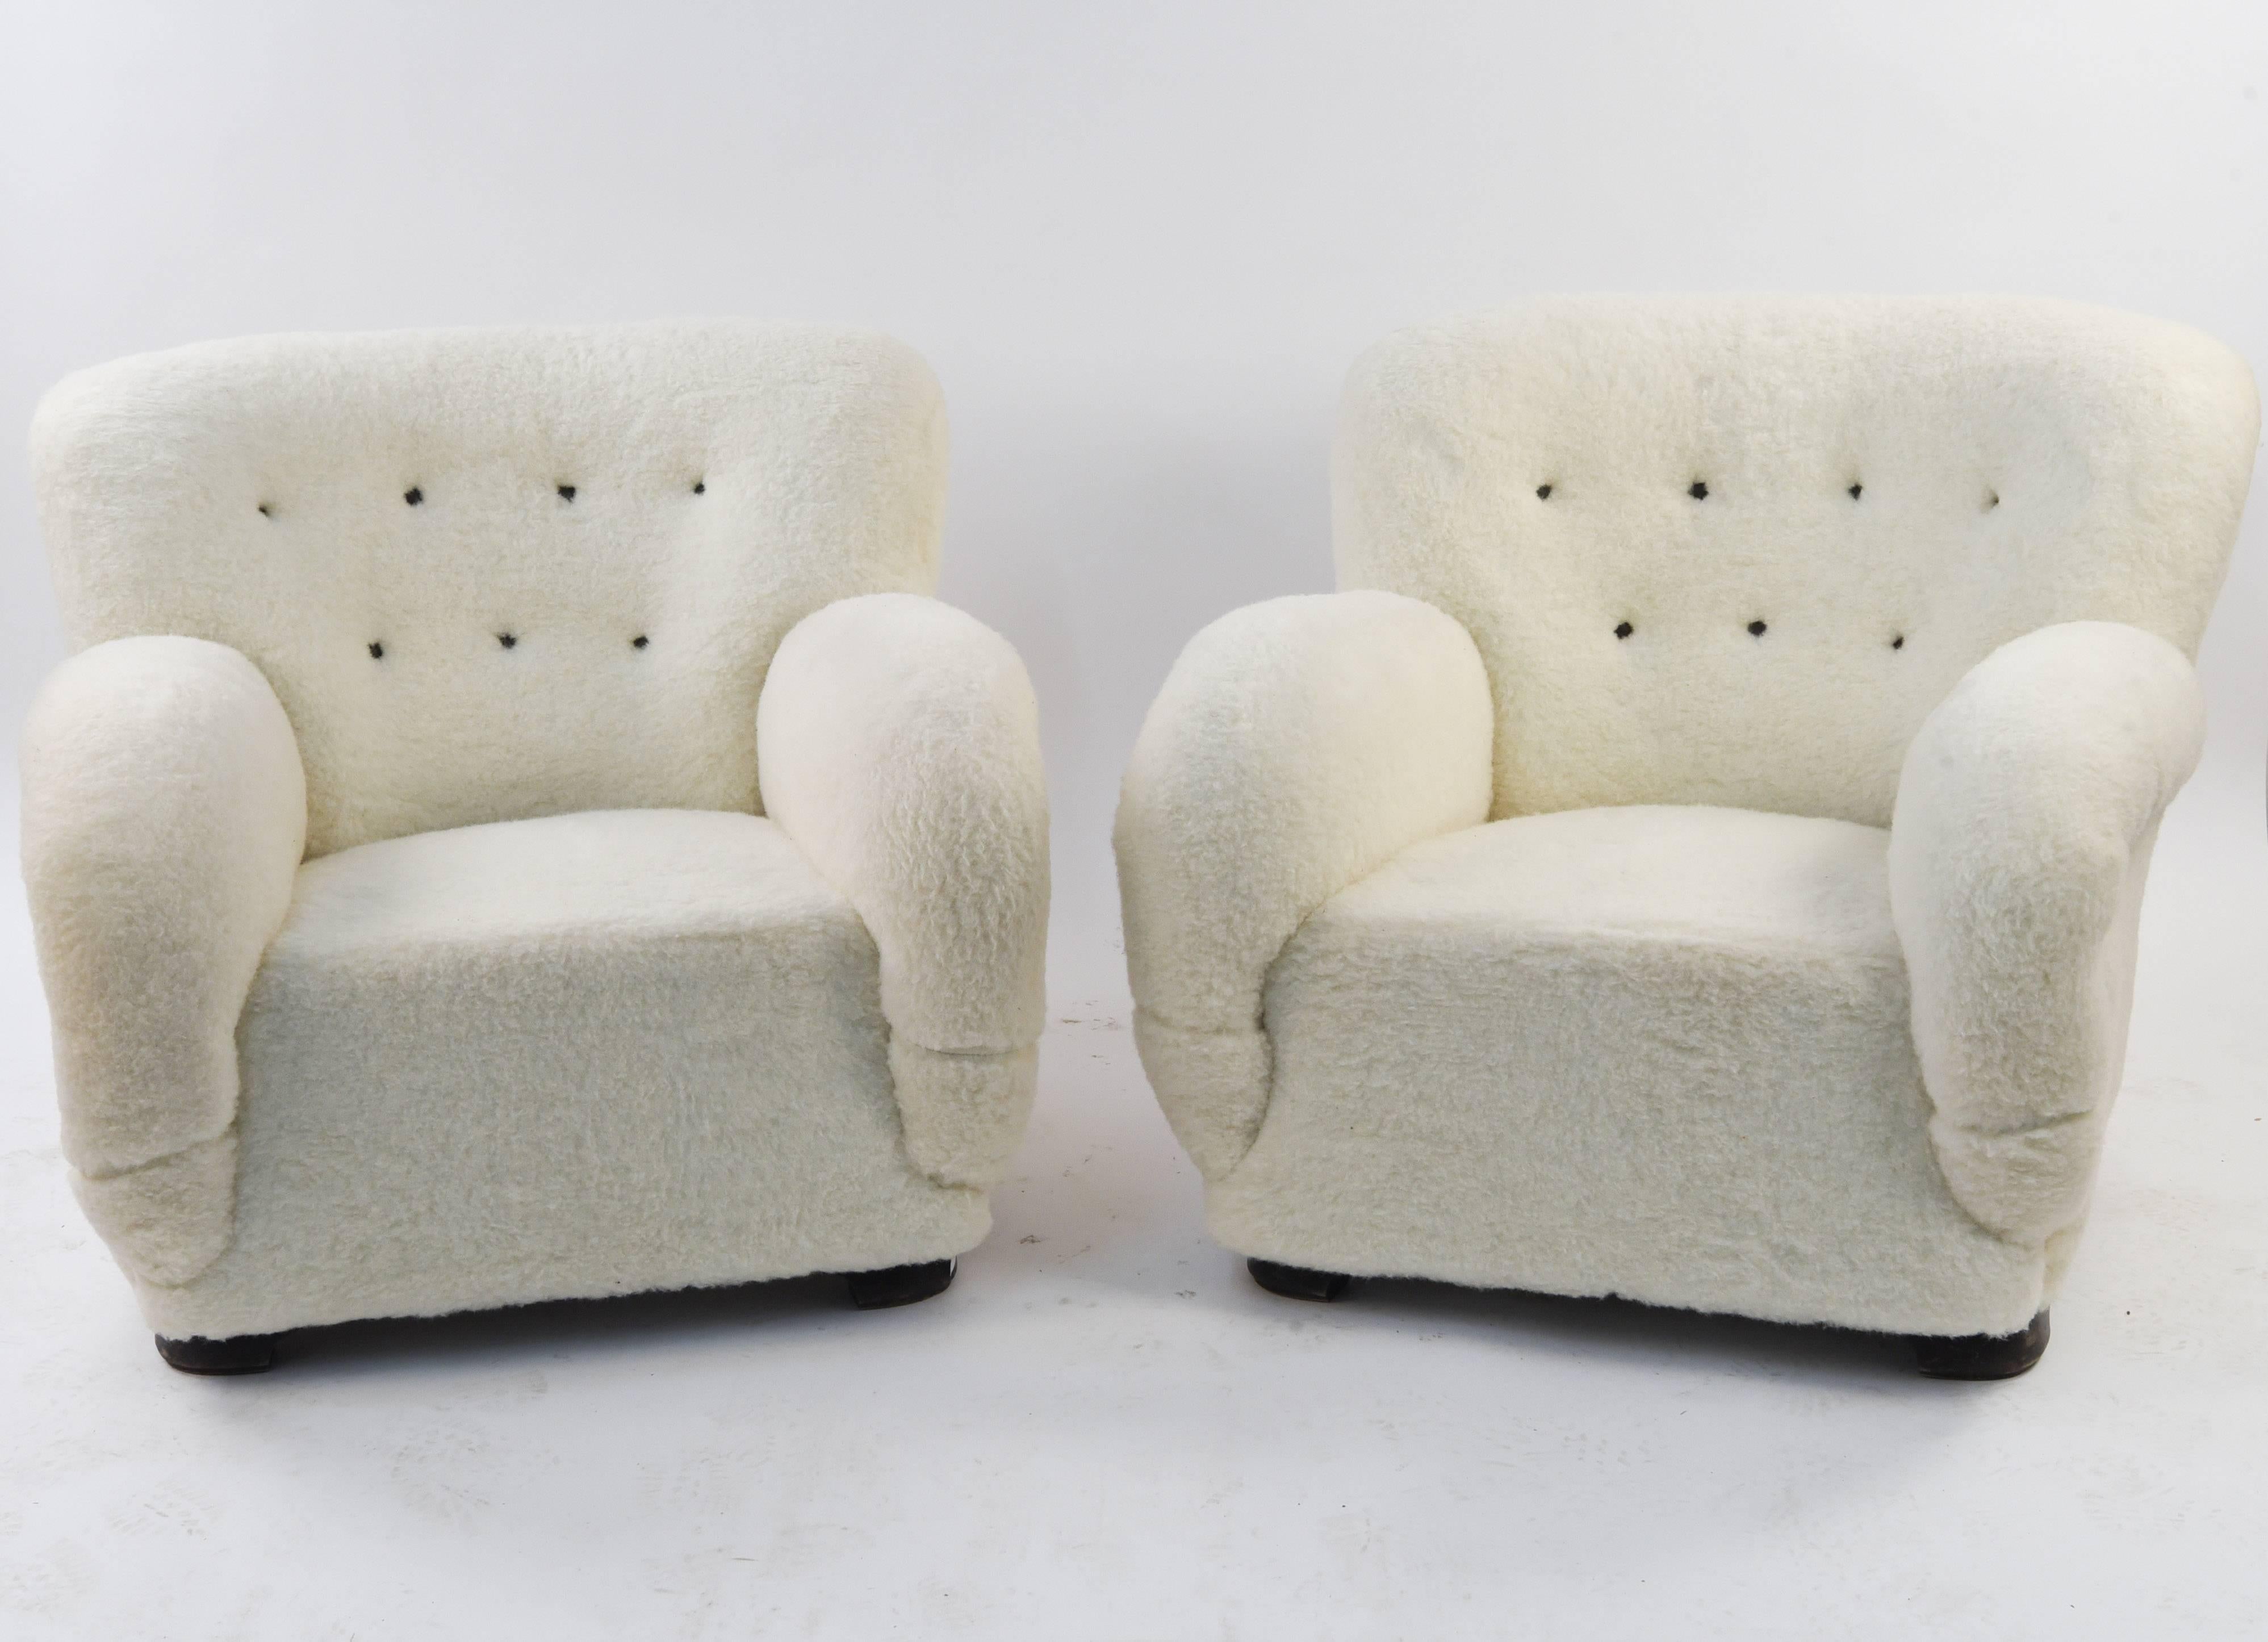 This is an incredible pair of Danish easy chairs recently upholstered in lambs wool, circa 1940s. These will capture full attention as a statement piece. Comfortable and stylish.